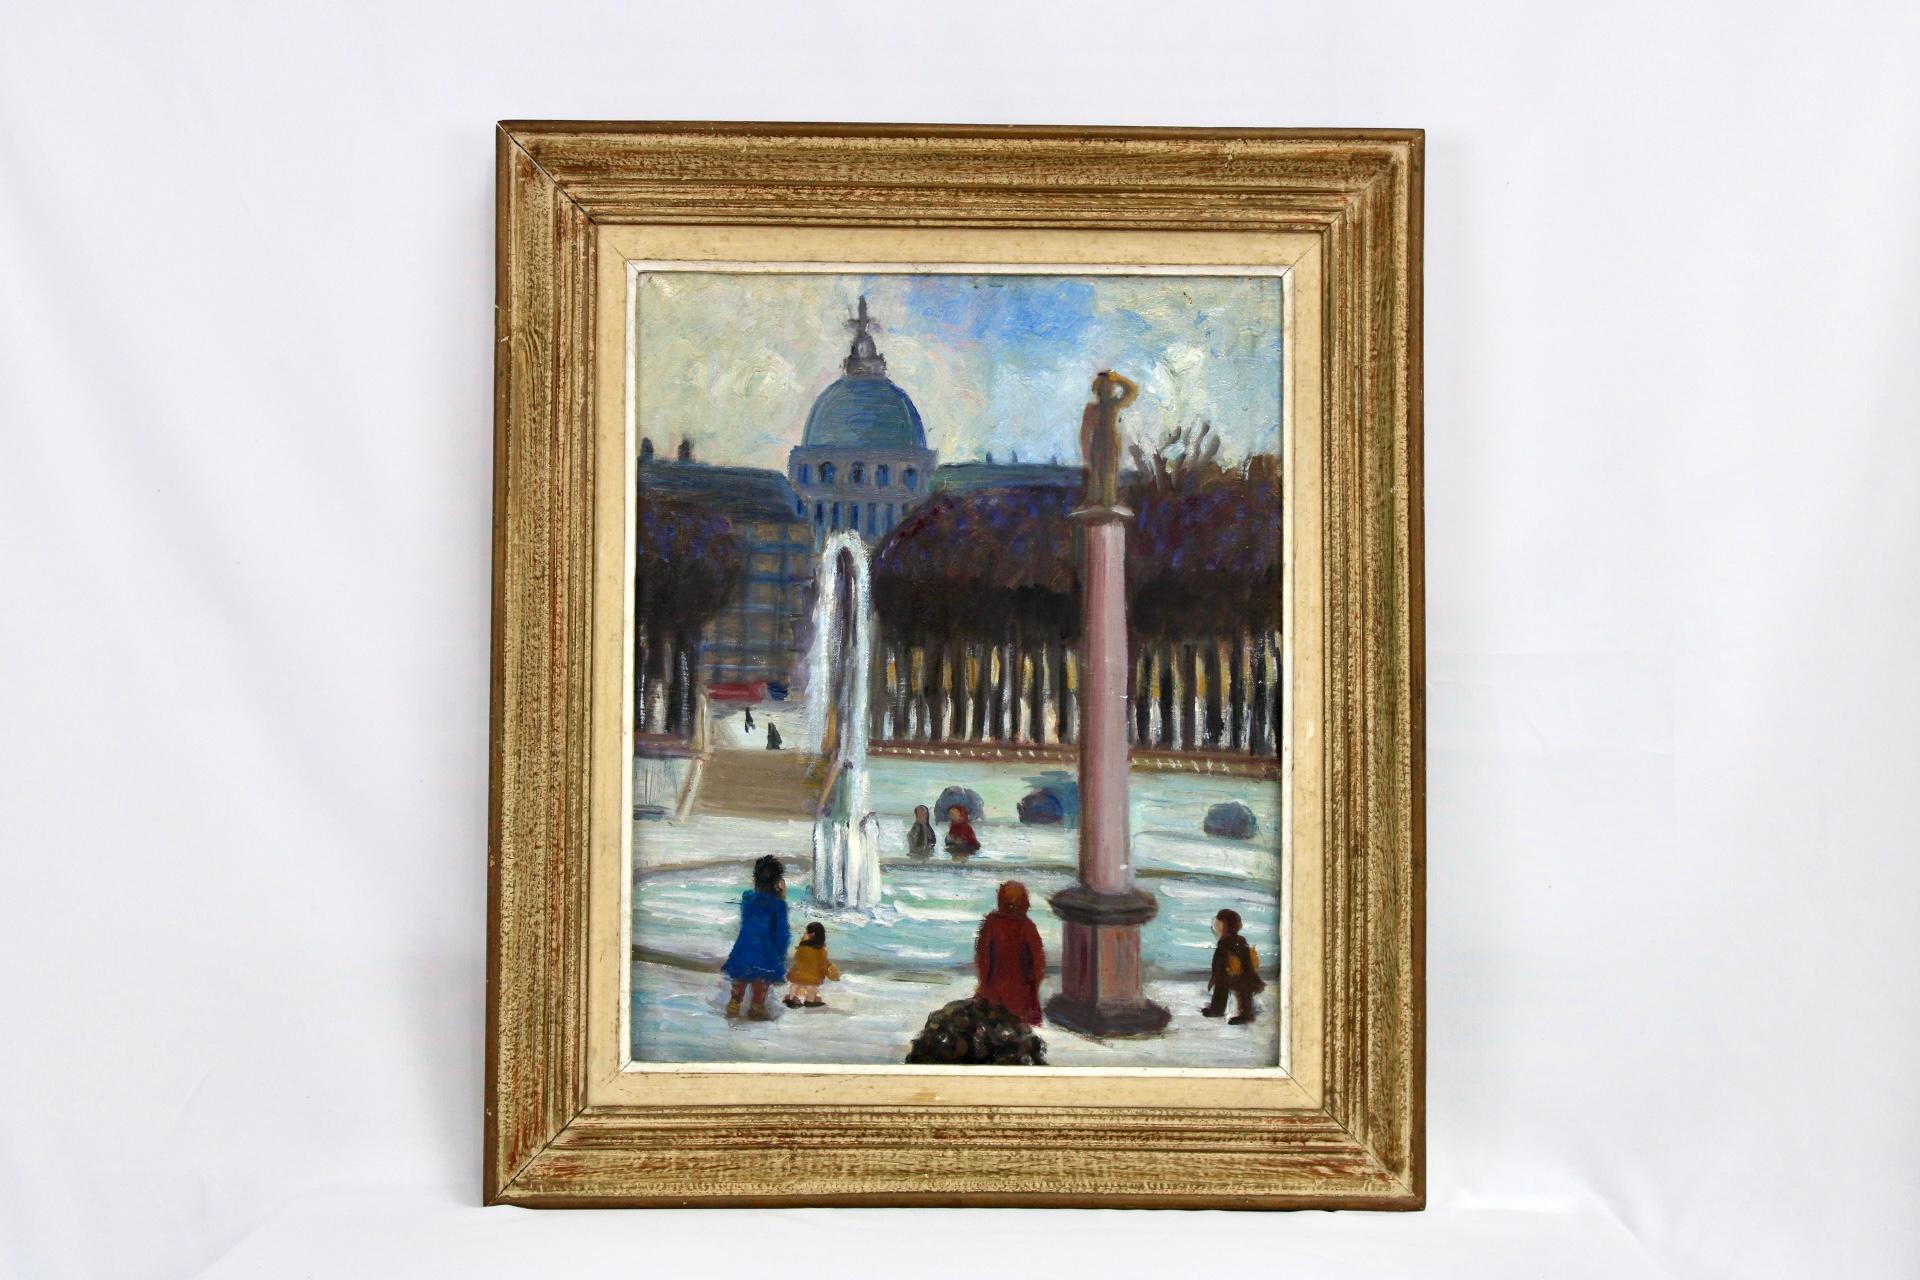 Winter in Paris, Original Vintage Oil on canvas, French Impressionist Style - Painting by Unknown